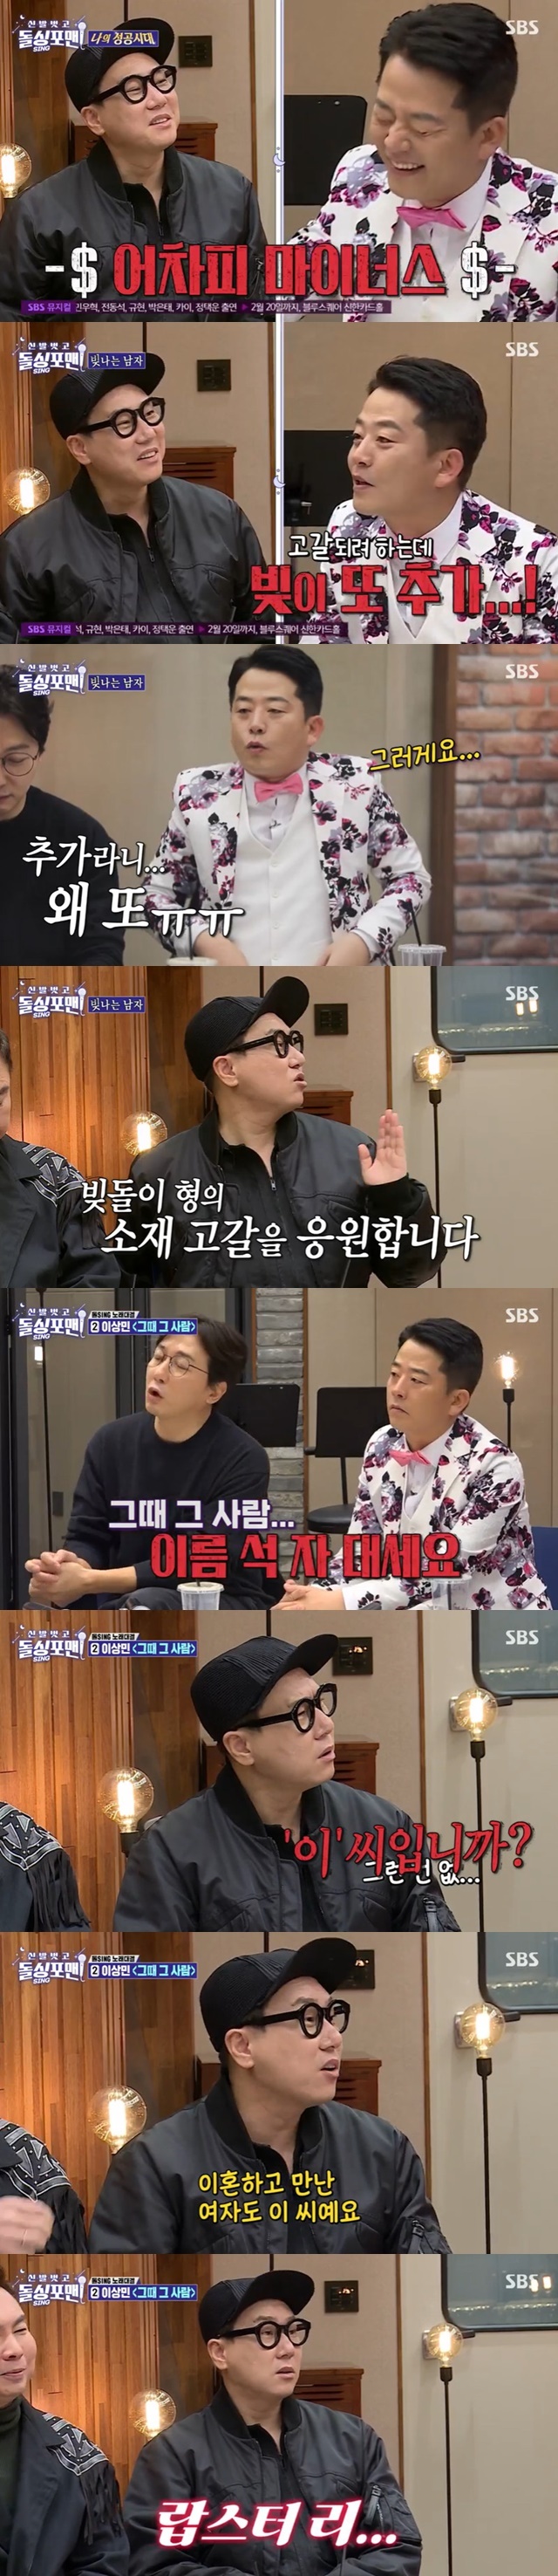 Lee Sang-min confessed about the added debt and post-divorce romanceLee Sang-min was attacked by additional debt and womens problems on SBS Take off your shoes and dolsing foreman broadcast on February 8th.On this day, trot singers Yonja Kim and Jang Yun-jeong appeared and talked about when they realized their success.First, Yonja Kim said that he was so popular that he could not walk around Myeongdong in his 20s, and Jang Yun-jeong said that Oh my God was popular in cell phone advertisements and received a golden phone.Jang Yun-jeong added that he was also popular with children at the time, so he was photographed in the bathhouse and later stopped going to the public bath.Kim Jun-ho said, There are juniors who earn money at once, and no matter how much they spend a month or two, the number of passengers in front of the bankbook will not change.I was so envious, he said to Lee Sang-min, I do not change my front seat.Jang Yun-jeong lamented, Do you go back to talk about it? Lee Sang-min said, Do you study it a day ago?Youre going to make fun of me when I see Lee Sang-min tomorrow?Lee Sang-min said, Someday the material will be Exhausted, but Kim Jun-ho said, I am going to be Exhausted, but my brother is adding light again.It was added again last year. Suddenly, 500 million or 600 million, he continued.When Jang Yun-jeong lamented, Why? Lee Sang-min said, 900 million is 164,000. 74,000 added. Thats the end.There is no further addition.Tak Jae-hun asked Yonja Kim, What if I live with such a man? And Yonja Kim said, I do not care if I like it.I have the ability to do that, he said, earning the nickname of Princess Pyeonggang and Princess Kim. If I love you and I owe you, I will pay you back.Im afraid Ill love you, but if you have a debt, youll have to shake it off.Subsequently, the stone-singing men Kim Jun-ho, Lee Sang-min, Tak Jae-hun and Im Won-hee were in turn verified by Yonja Kim and Jang Yun-jeong.First, Kim Jun-ho sang Hwang Jin-yi and received a praise from Yonja Kim for I can sing.Lee Sang-min arranged the person at that time in his own style, and Tak Jae-hun attacked the diverce saying, Then name him. Is it Mr. Lee?Lee Sang-min replied, The woman I met with Divorce is Lee. Im Won-hee said, You know what?Is there a special person? Lee Sang-min replied, You know, I bought you a lobster.In the last broadcast, Lee Sang-min said he had borrowed money to buy lobsters. Tak Jae-hun said, You have not forgotten her yet? One point.I am sorry for the song, so I will give you a point. 